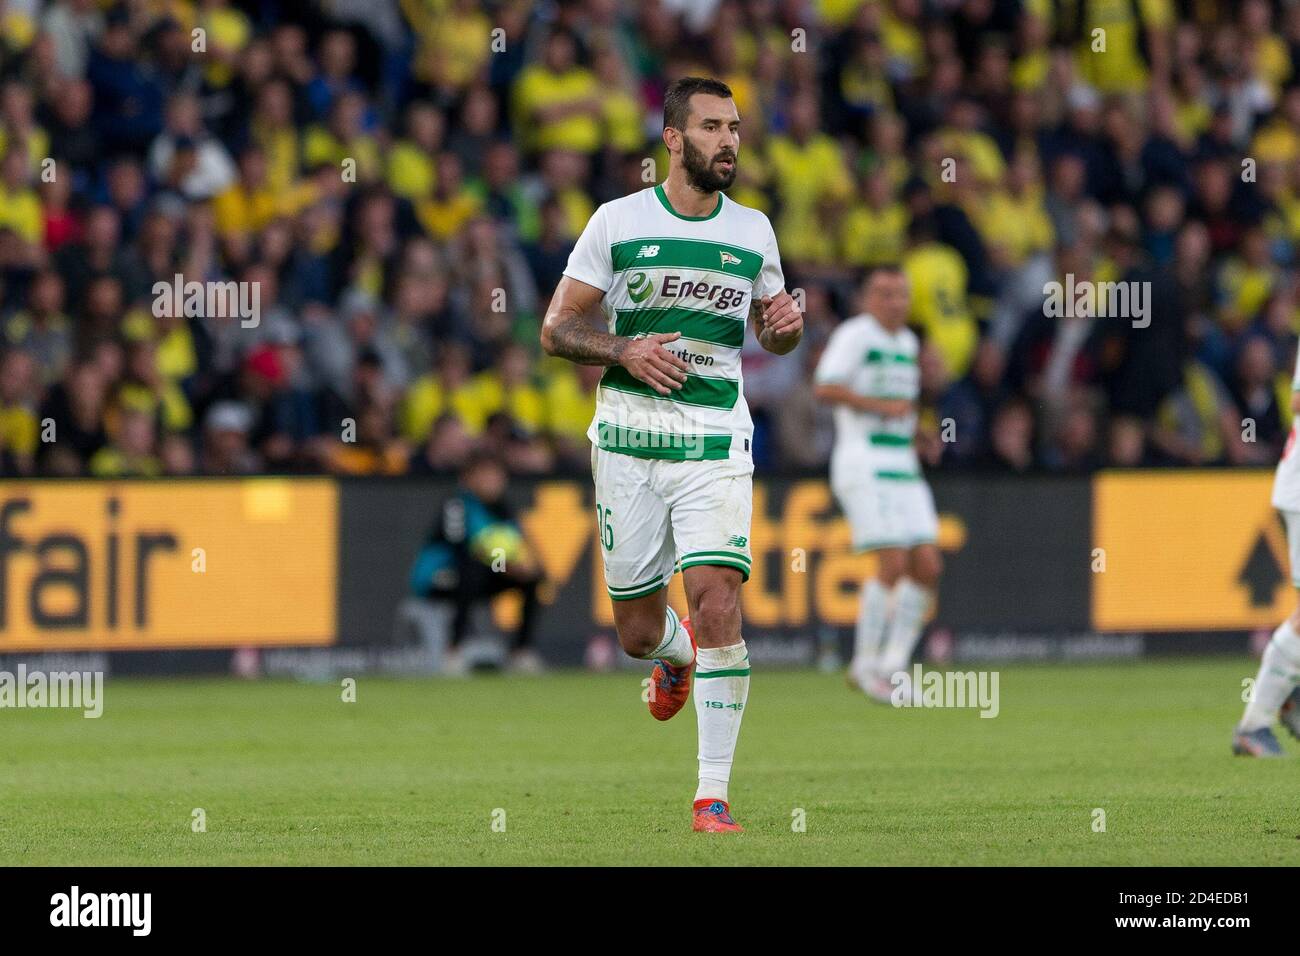 Brondby, Denmark. 01st, August 2019. Blazej Augustyn (26) of Lechia Gdansk seen during the UEFA Europa League qualification match between Brondby IF and Lechia Gdansk at Brondby Stadion, (Photo credit: Gonzales Photo - Thomas Rasmussen). Stock Photo